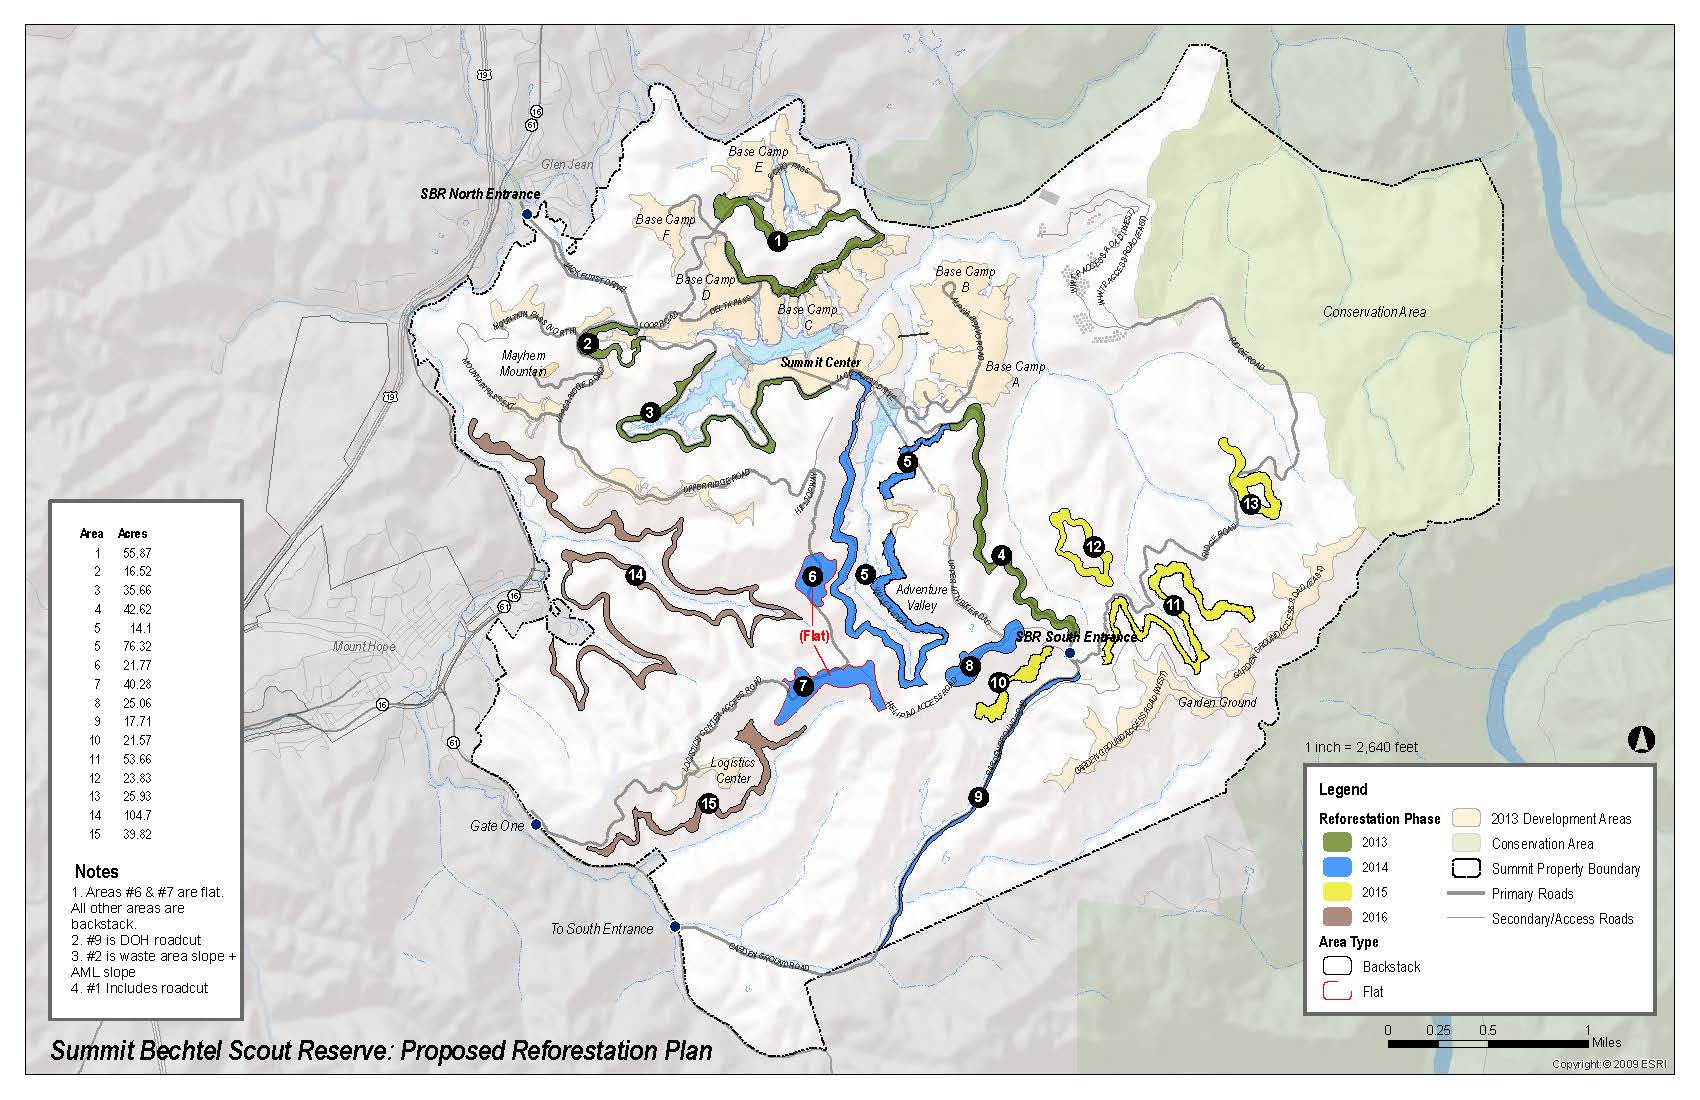 This image shows the area of the current Bechtel Summit Reserve in southern West Virginia. The base map is a topographic map and the outline of the reserve is shown with a black dotted outline. Within the reserve, the different planting sites are show as polygons of different colors. Each polygon and color have been assigned a number which corresponds to the year that area was planted. Planting took place from 2013 - 2016 and it began in the northern part of the site, through the center, and then there were planting areas in the eastern and western side of the reserve.